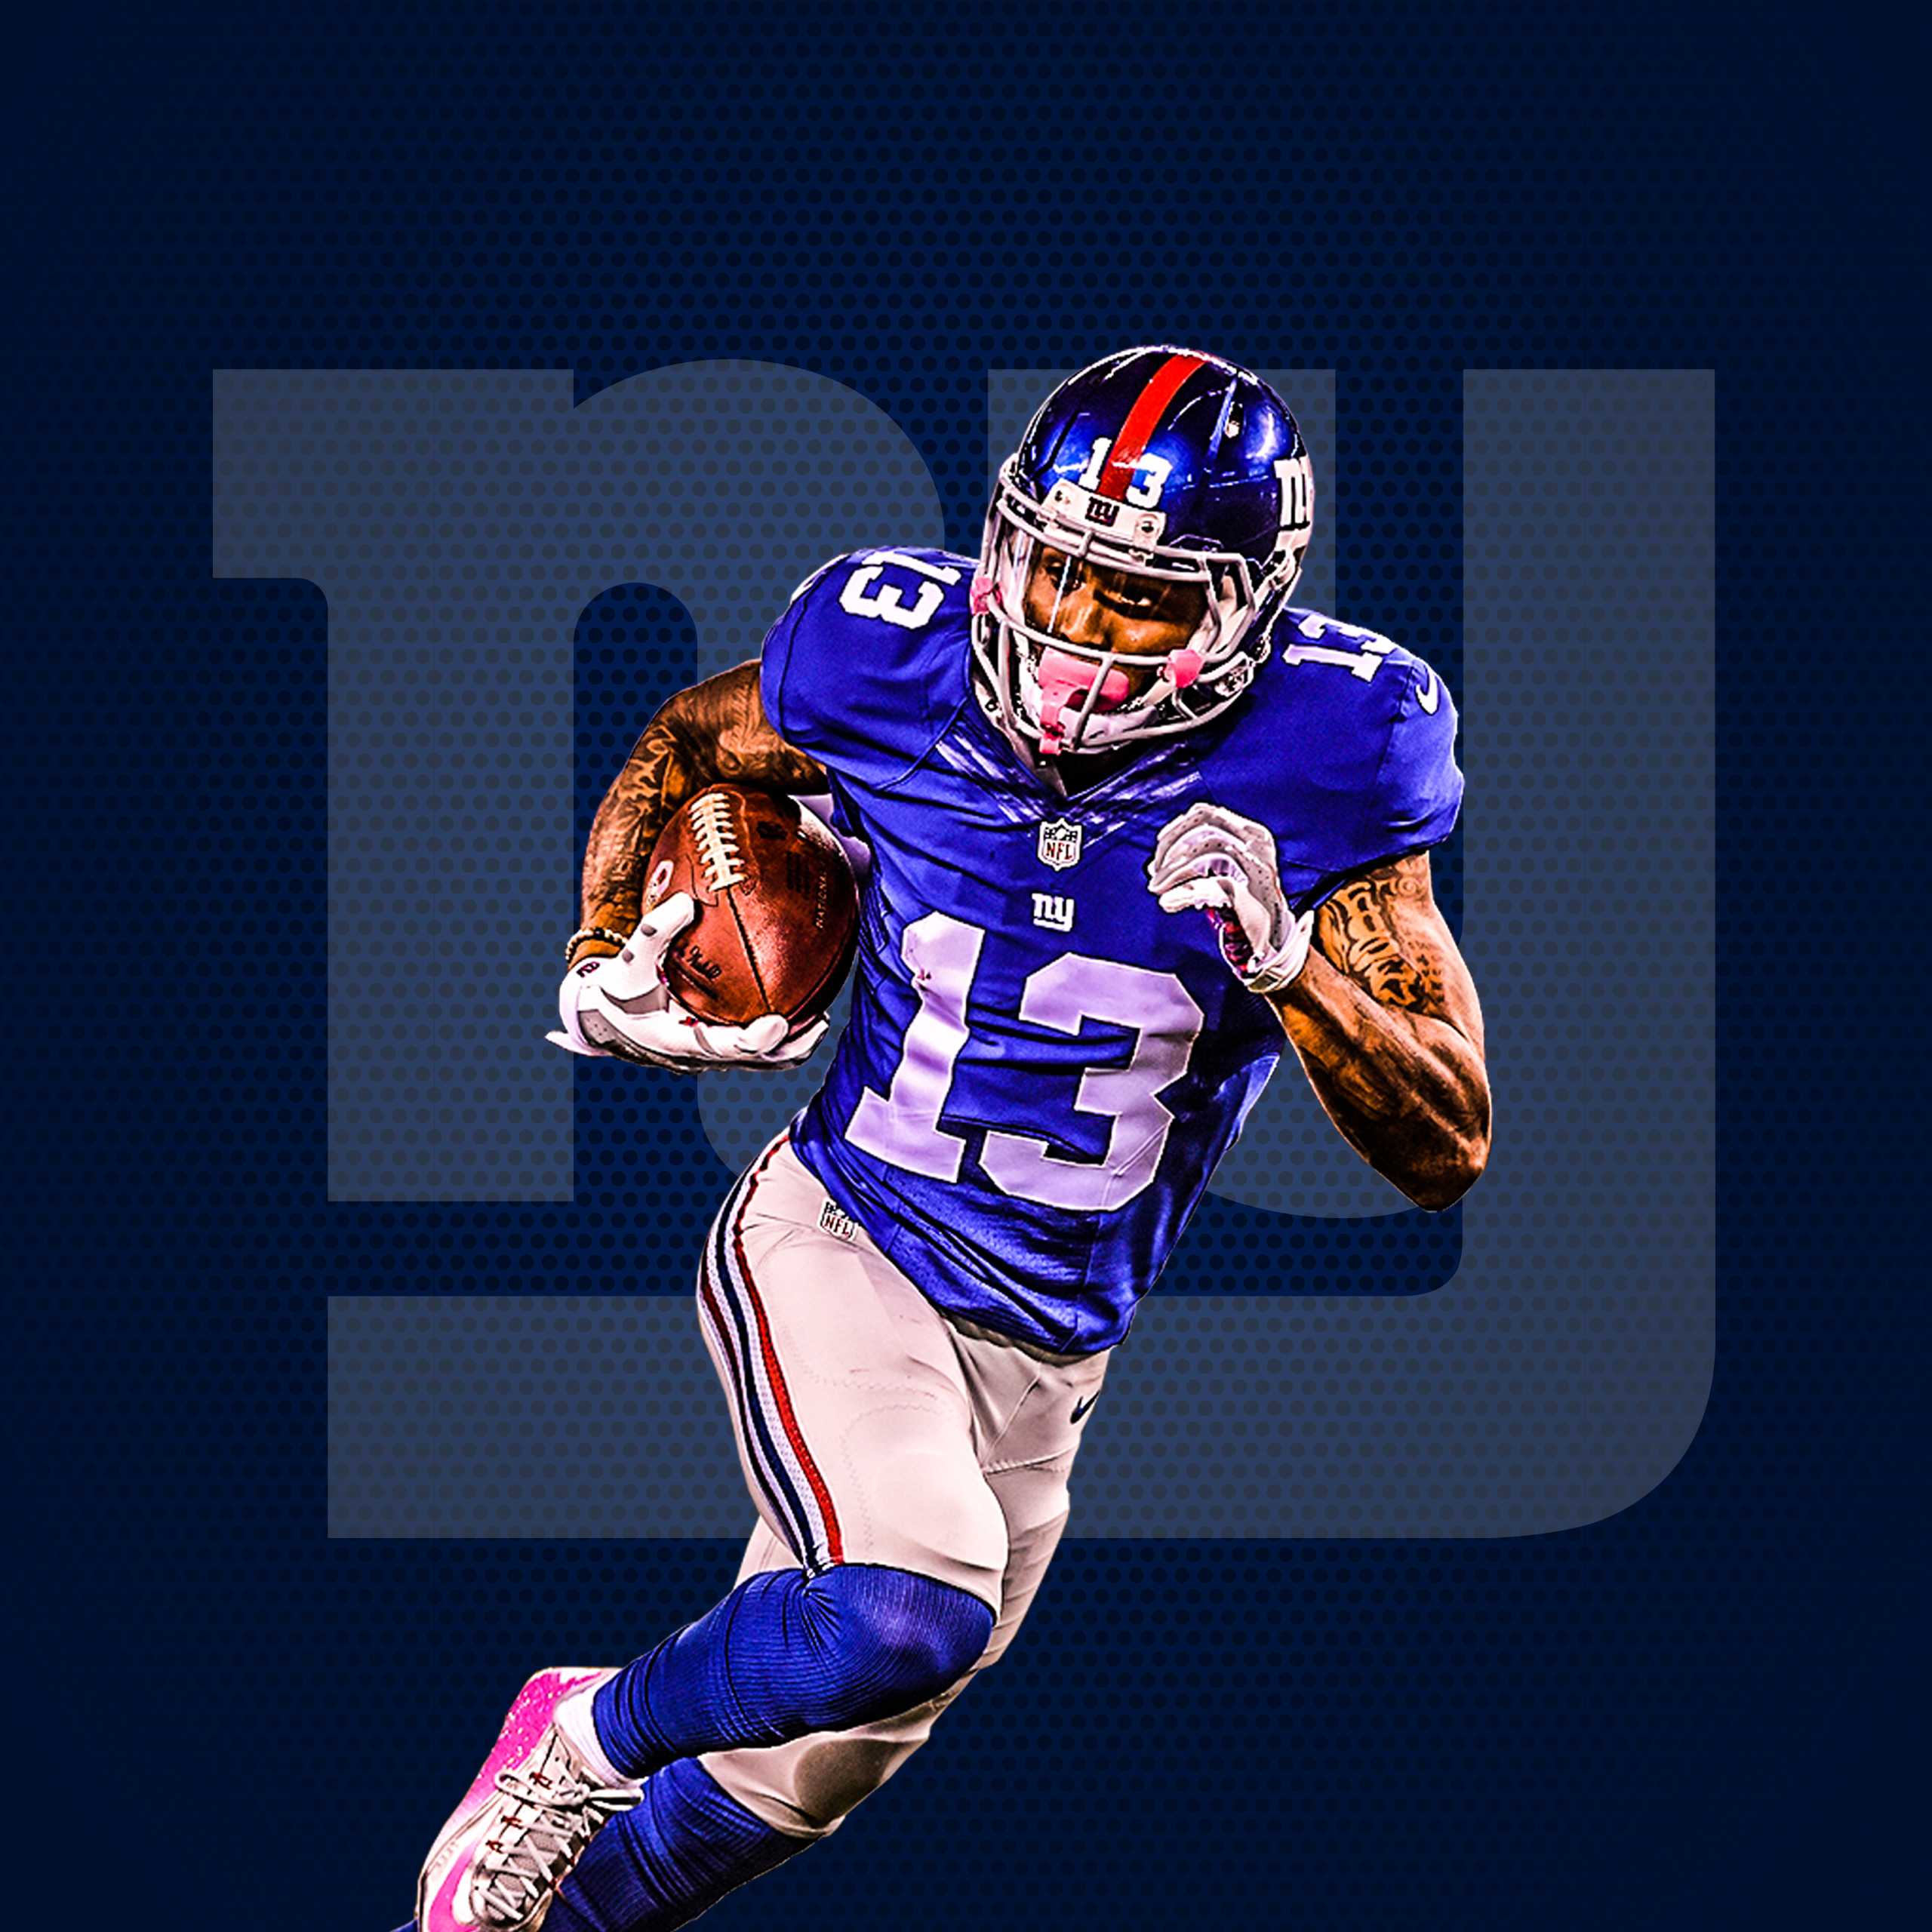 Odell Ny Wallpaper Full HD High Resolution Of iPhone The Schedule